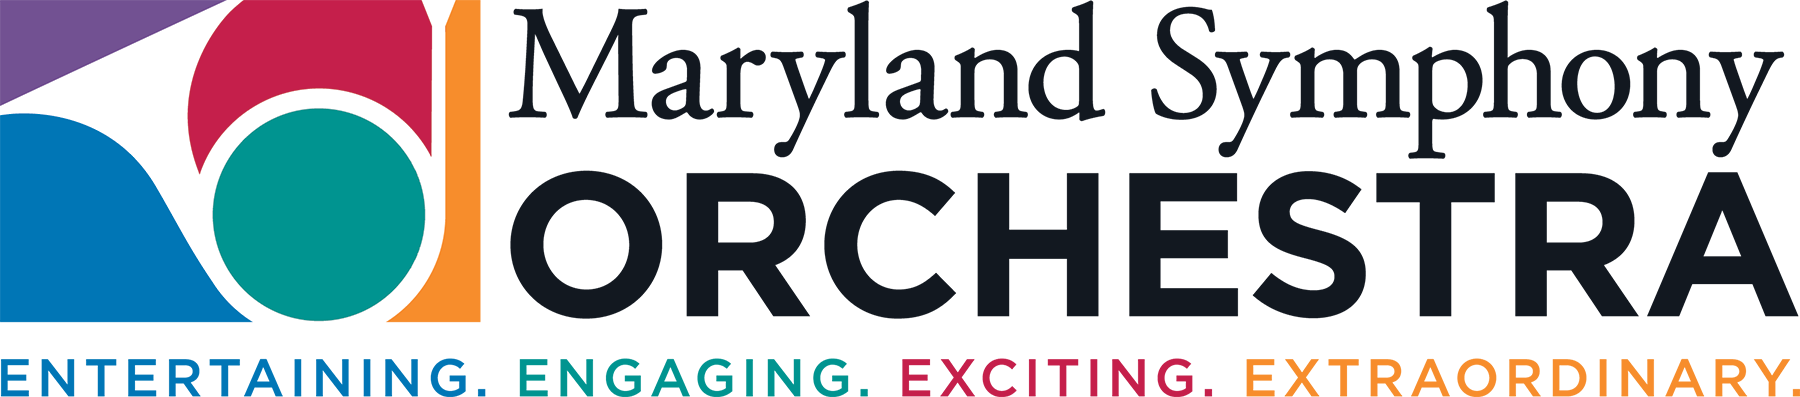 New logo for the Maryland Symphony Orchestra